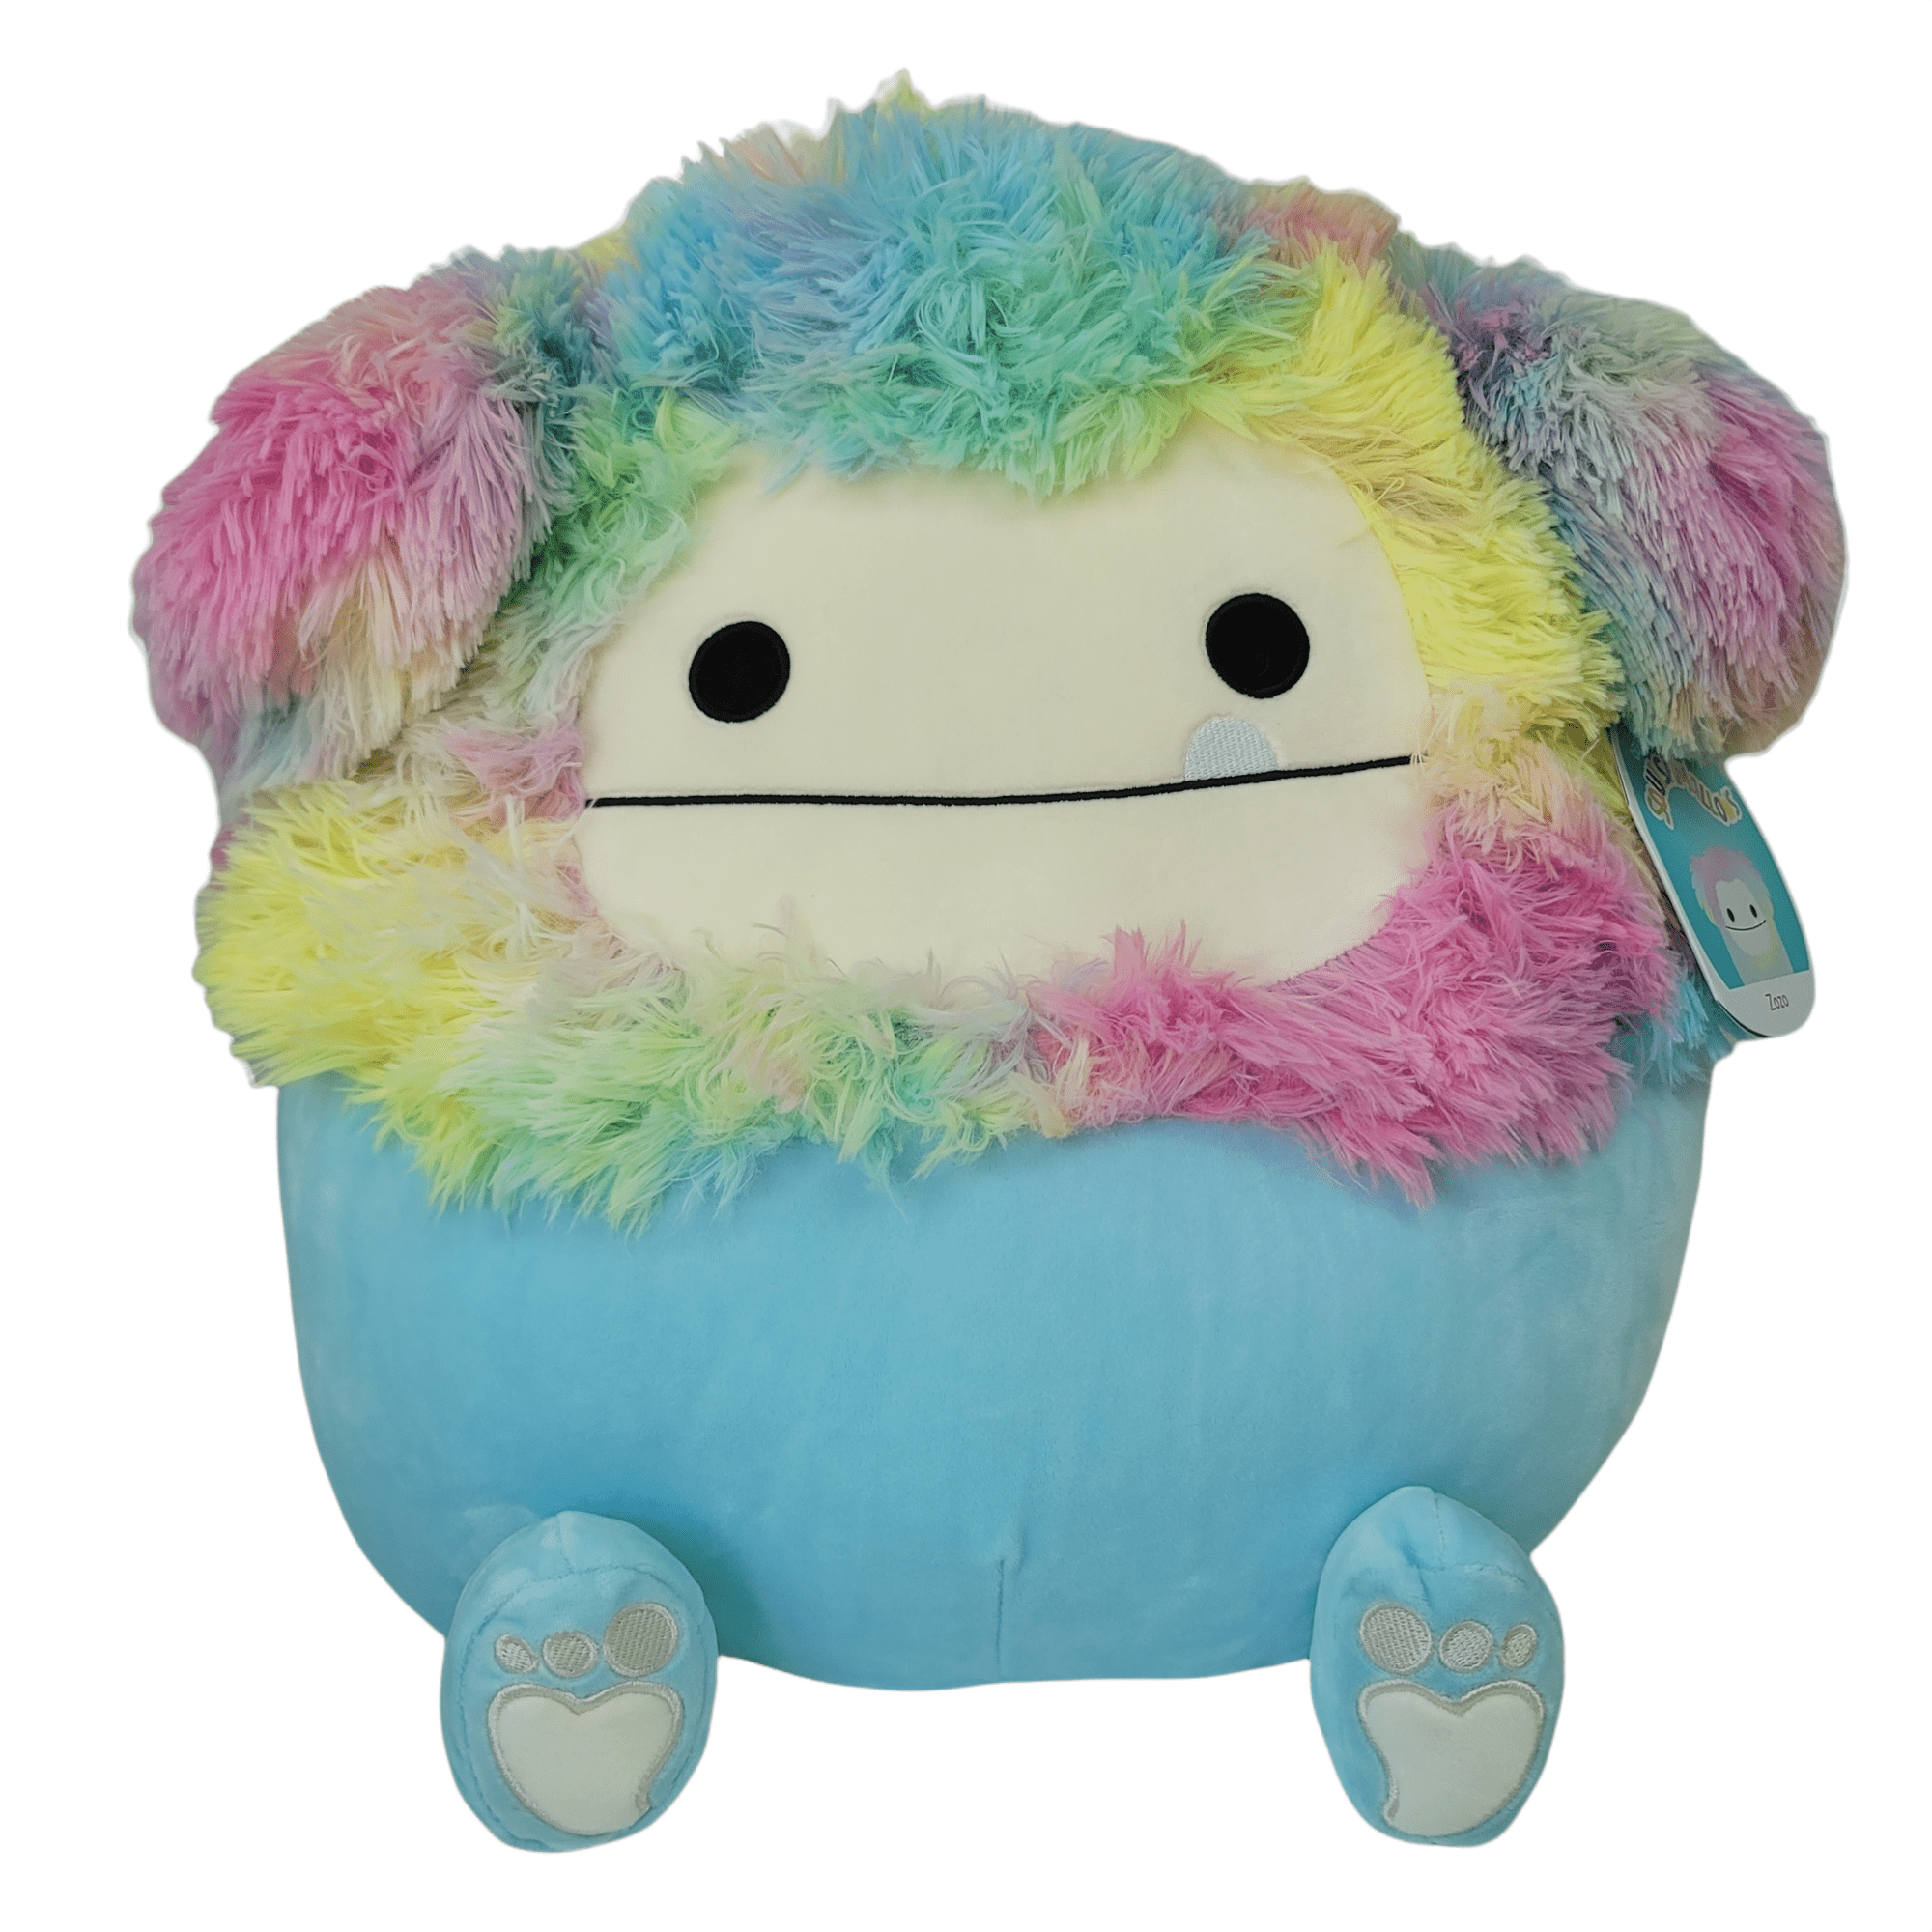 Details about   Squishmallows 12" Brina the Pink Bigfoot KellyToy Cute Plush NWT 2021 